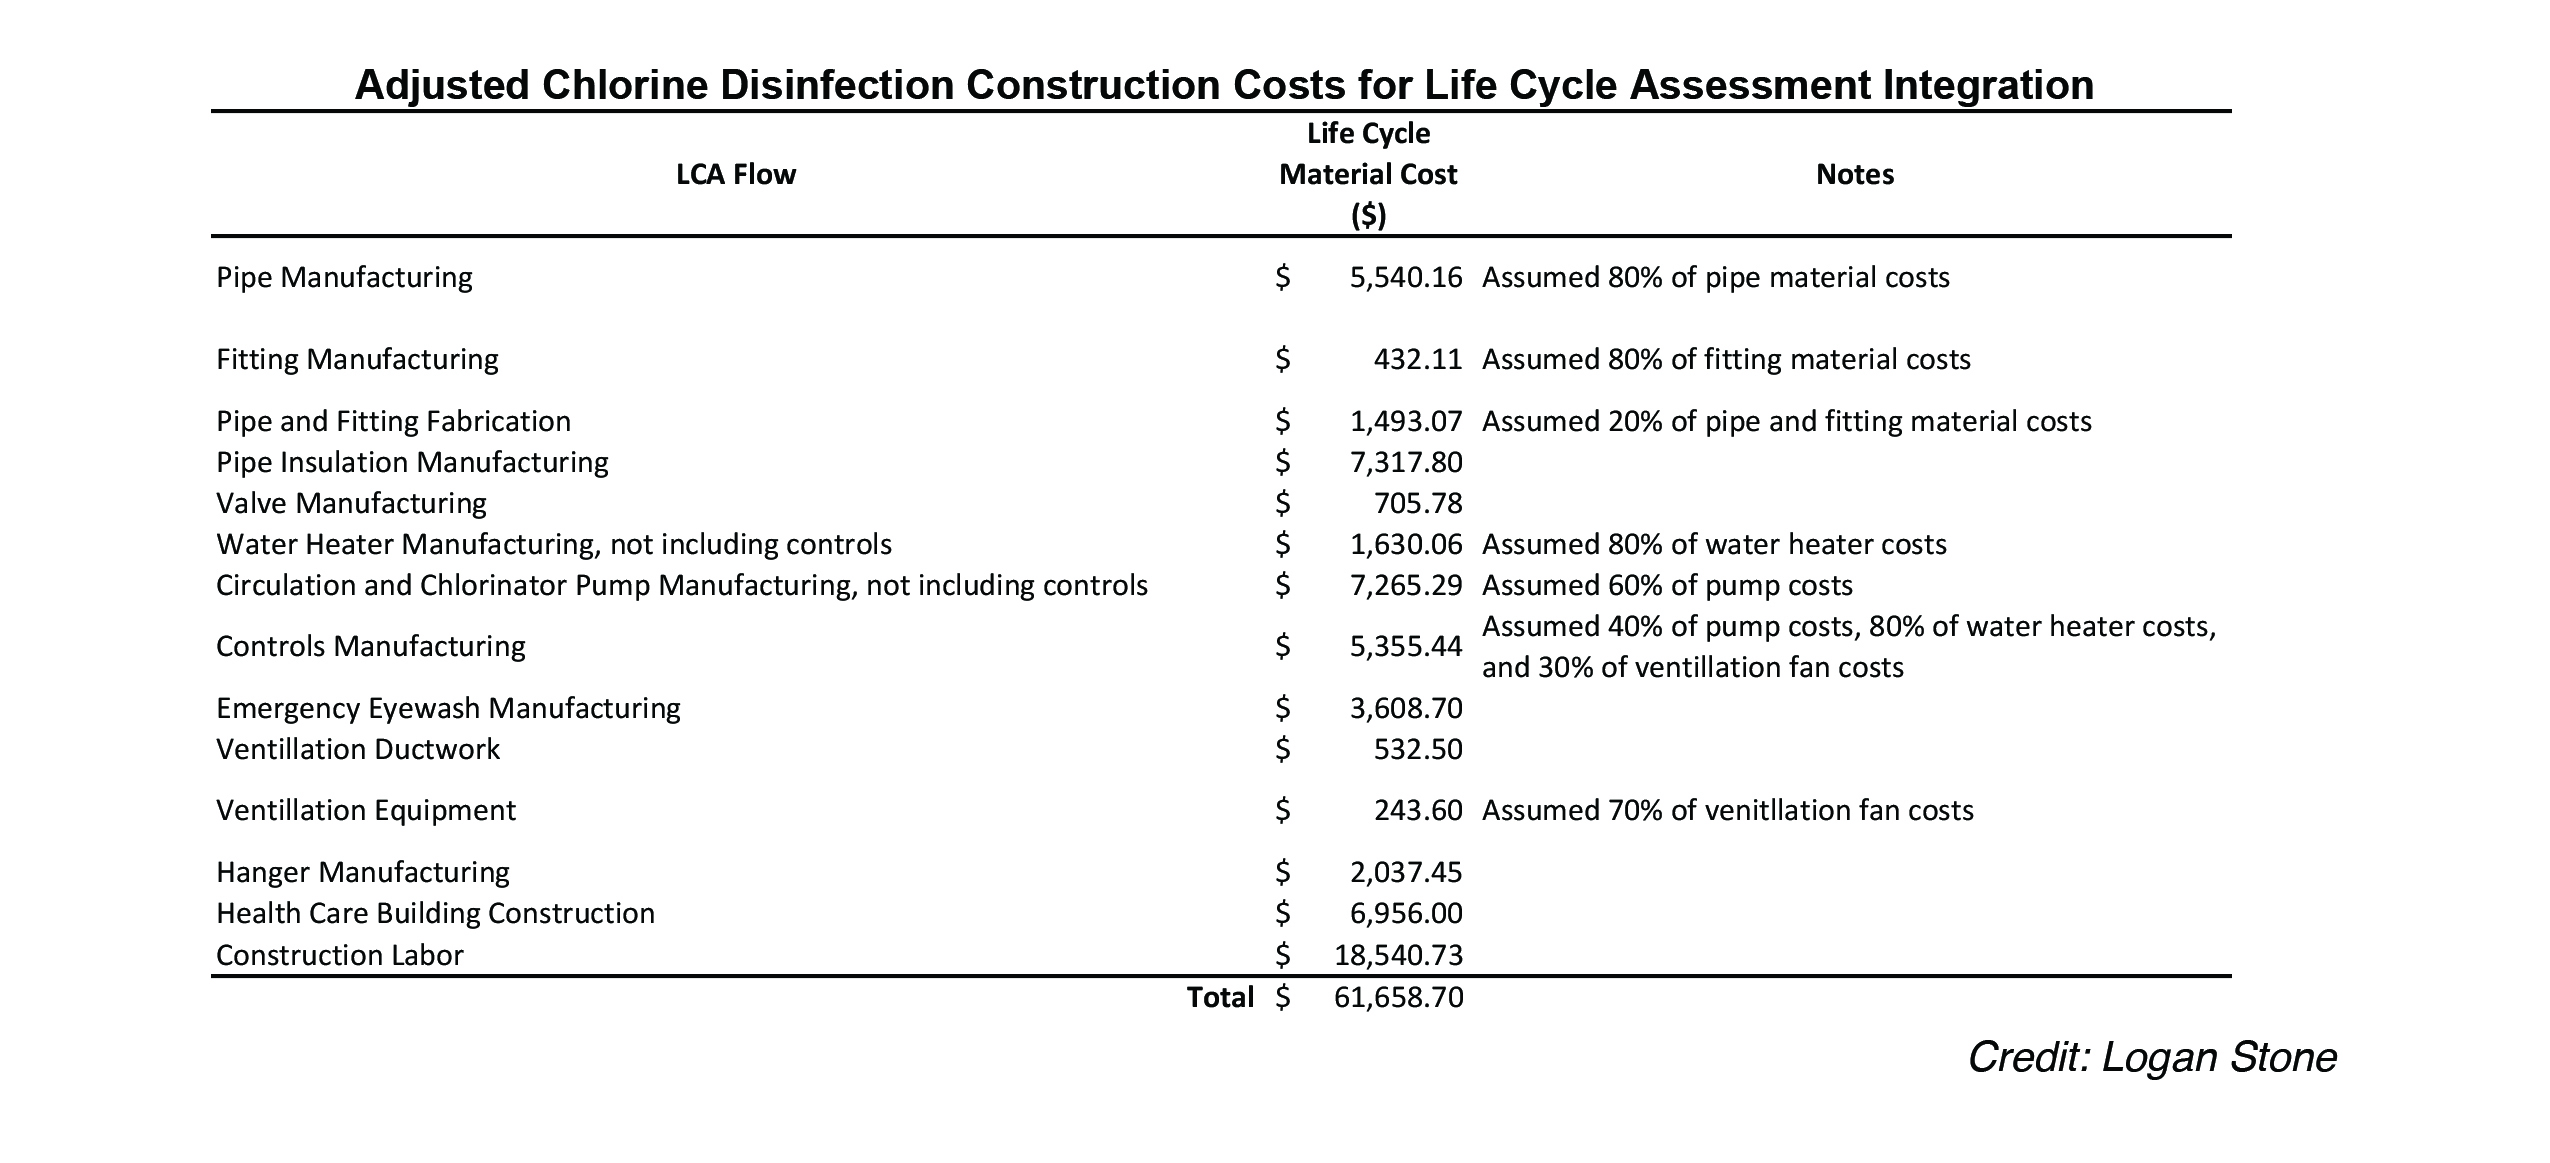 PE0322_Fig5-Adjusted Chlorine Disinfection Construction Costs for LCAI copy.jpg